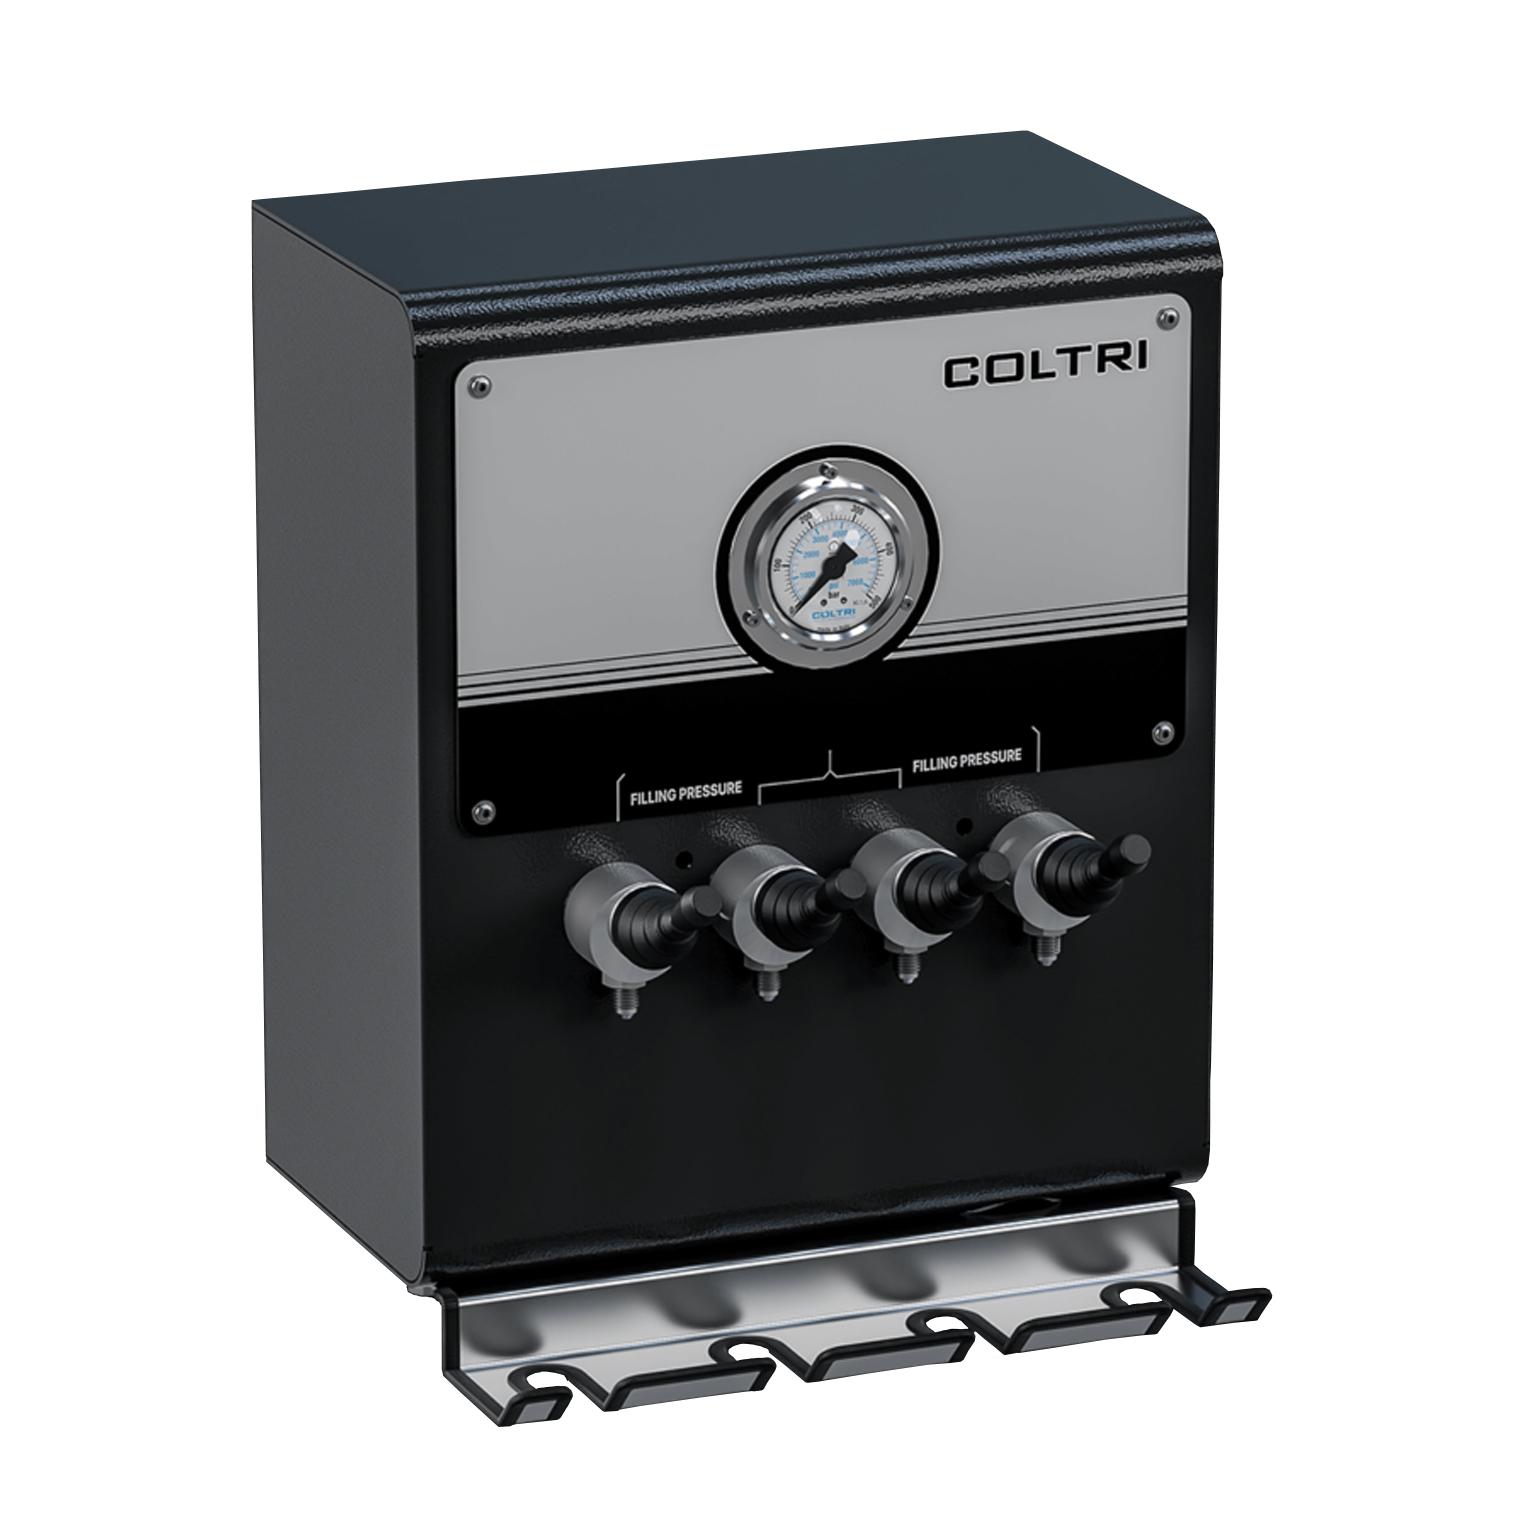 Coltri Filling Panel Single Pressure with 4 Lever Valves